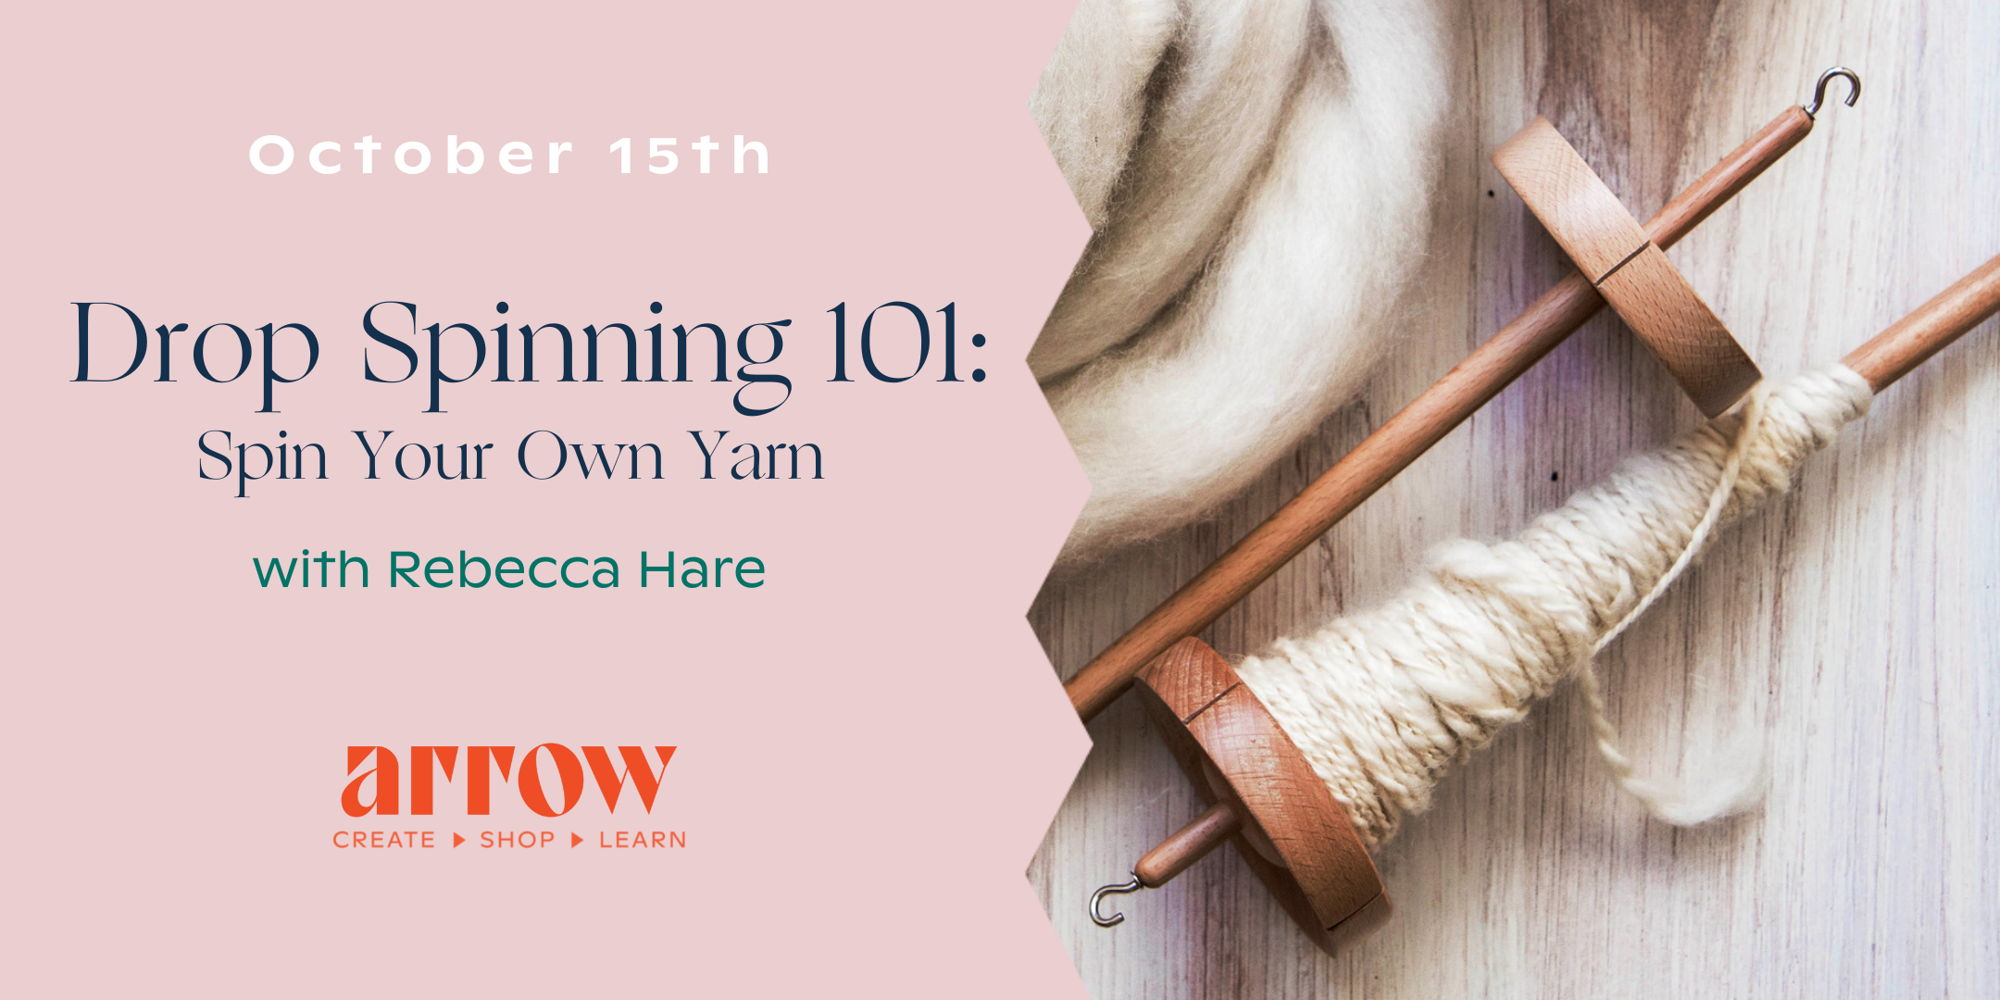 Drop Spinning 101: Spin Your Own Yarn with Rebecca Hare promotional image